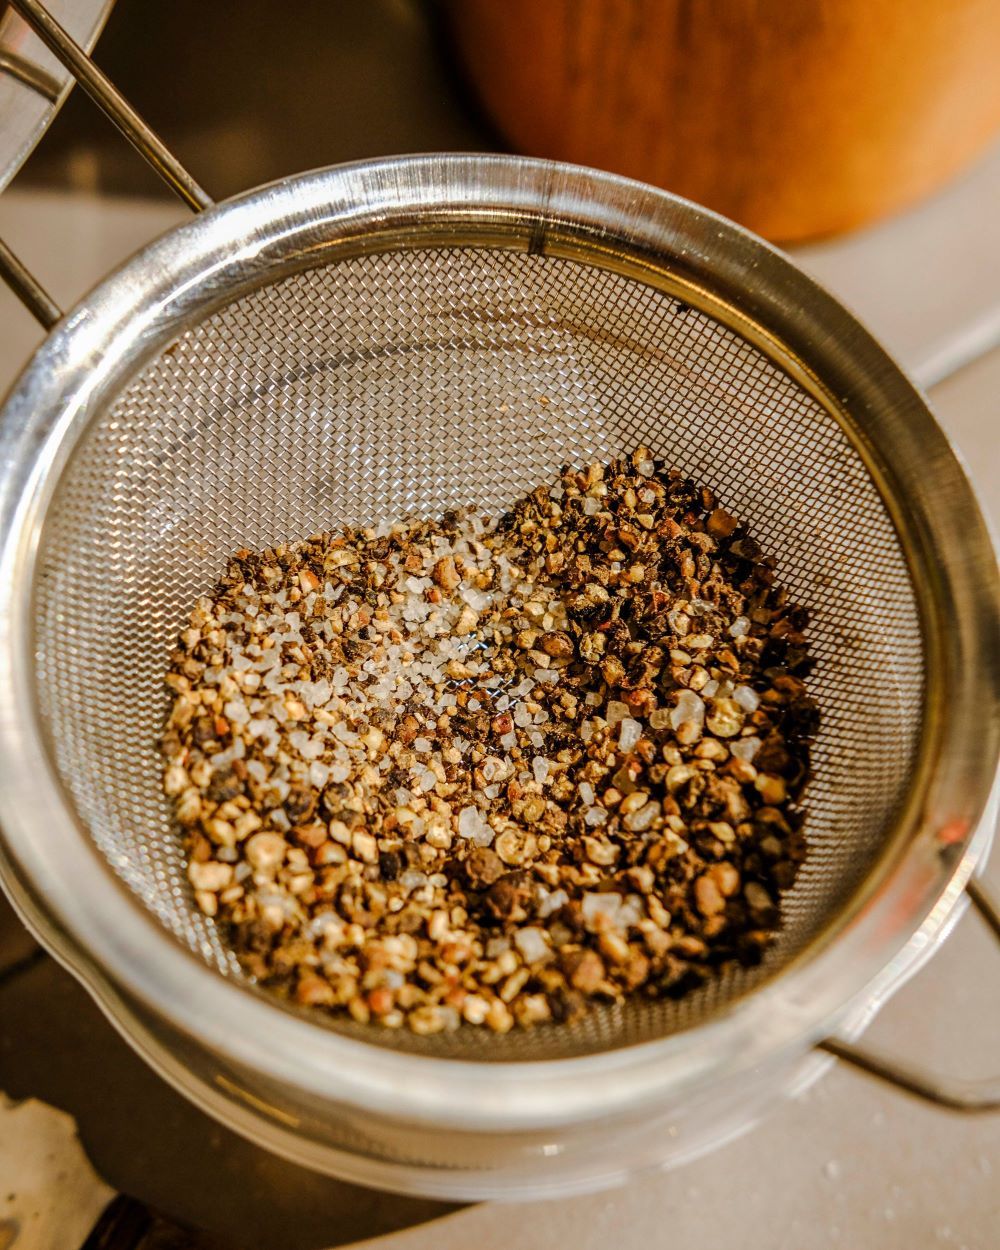 Getting the finer parts using strainer